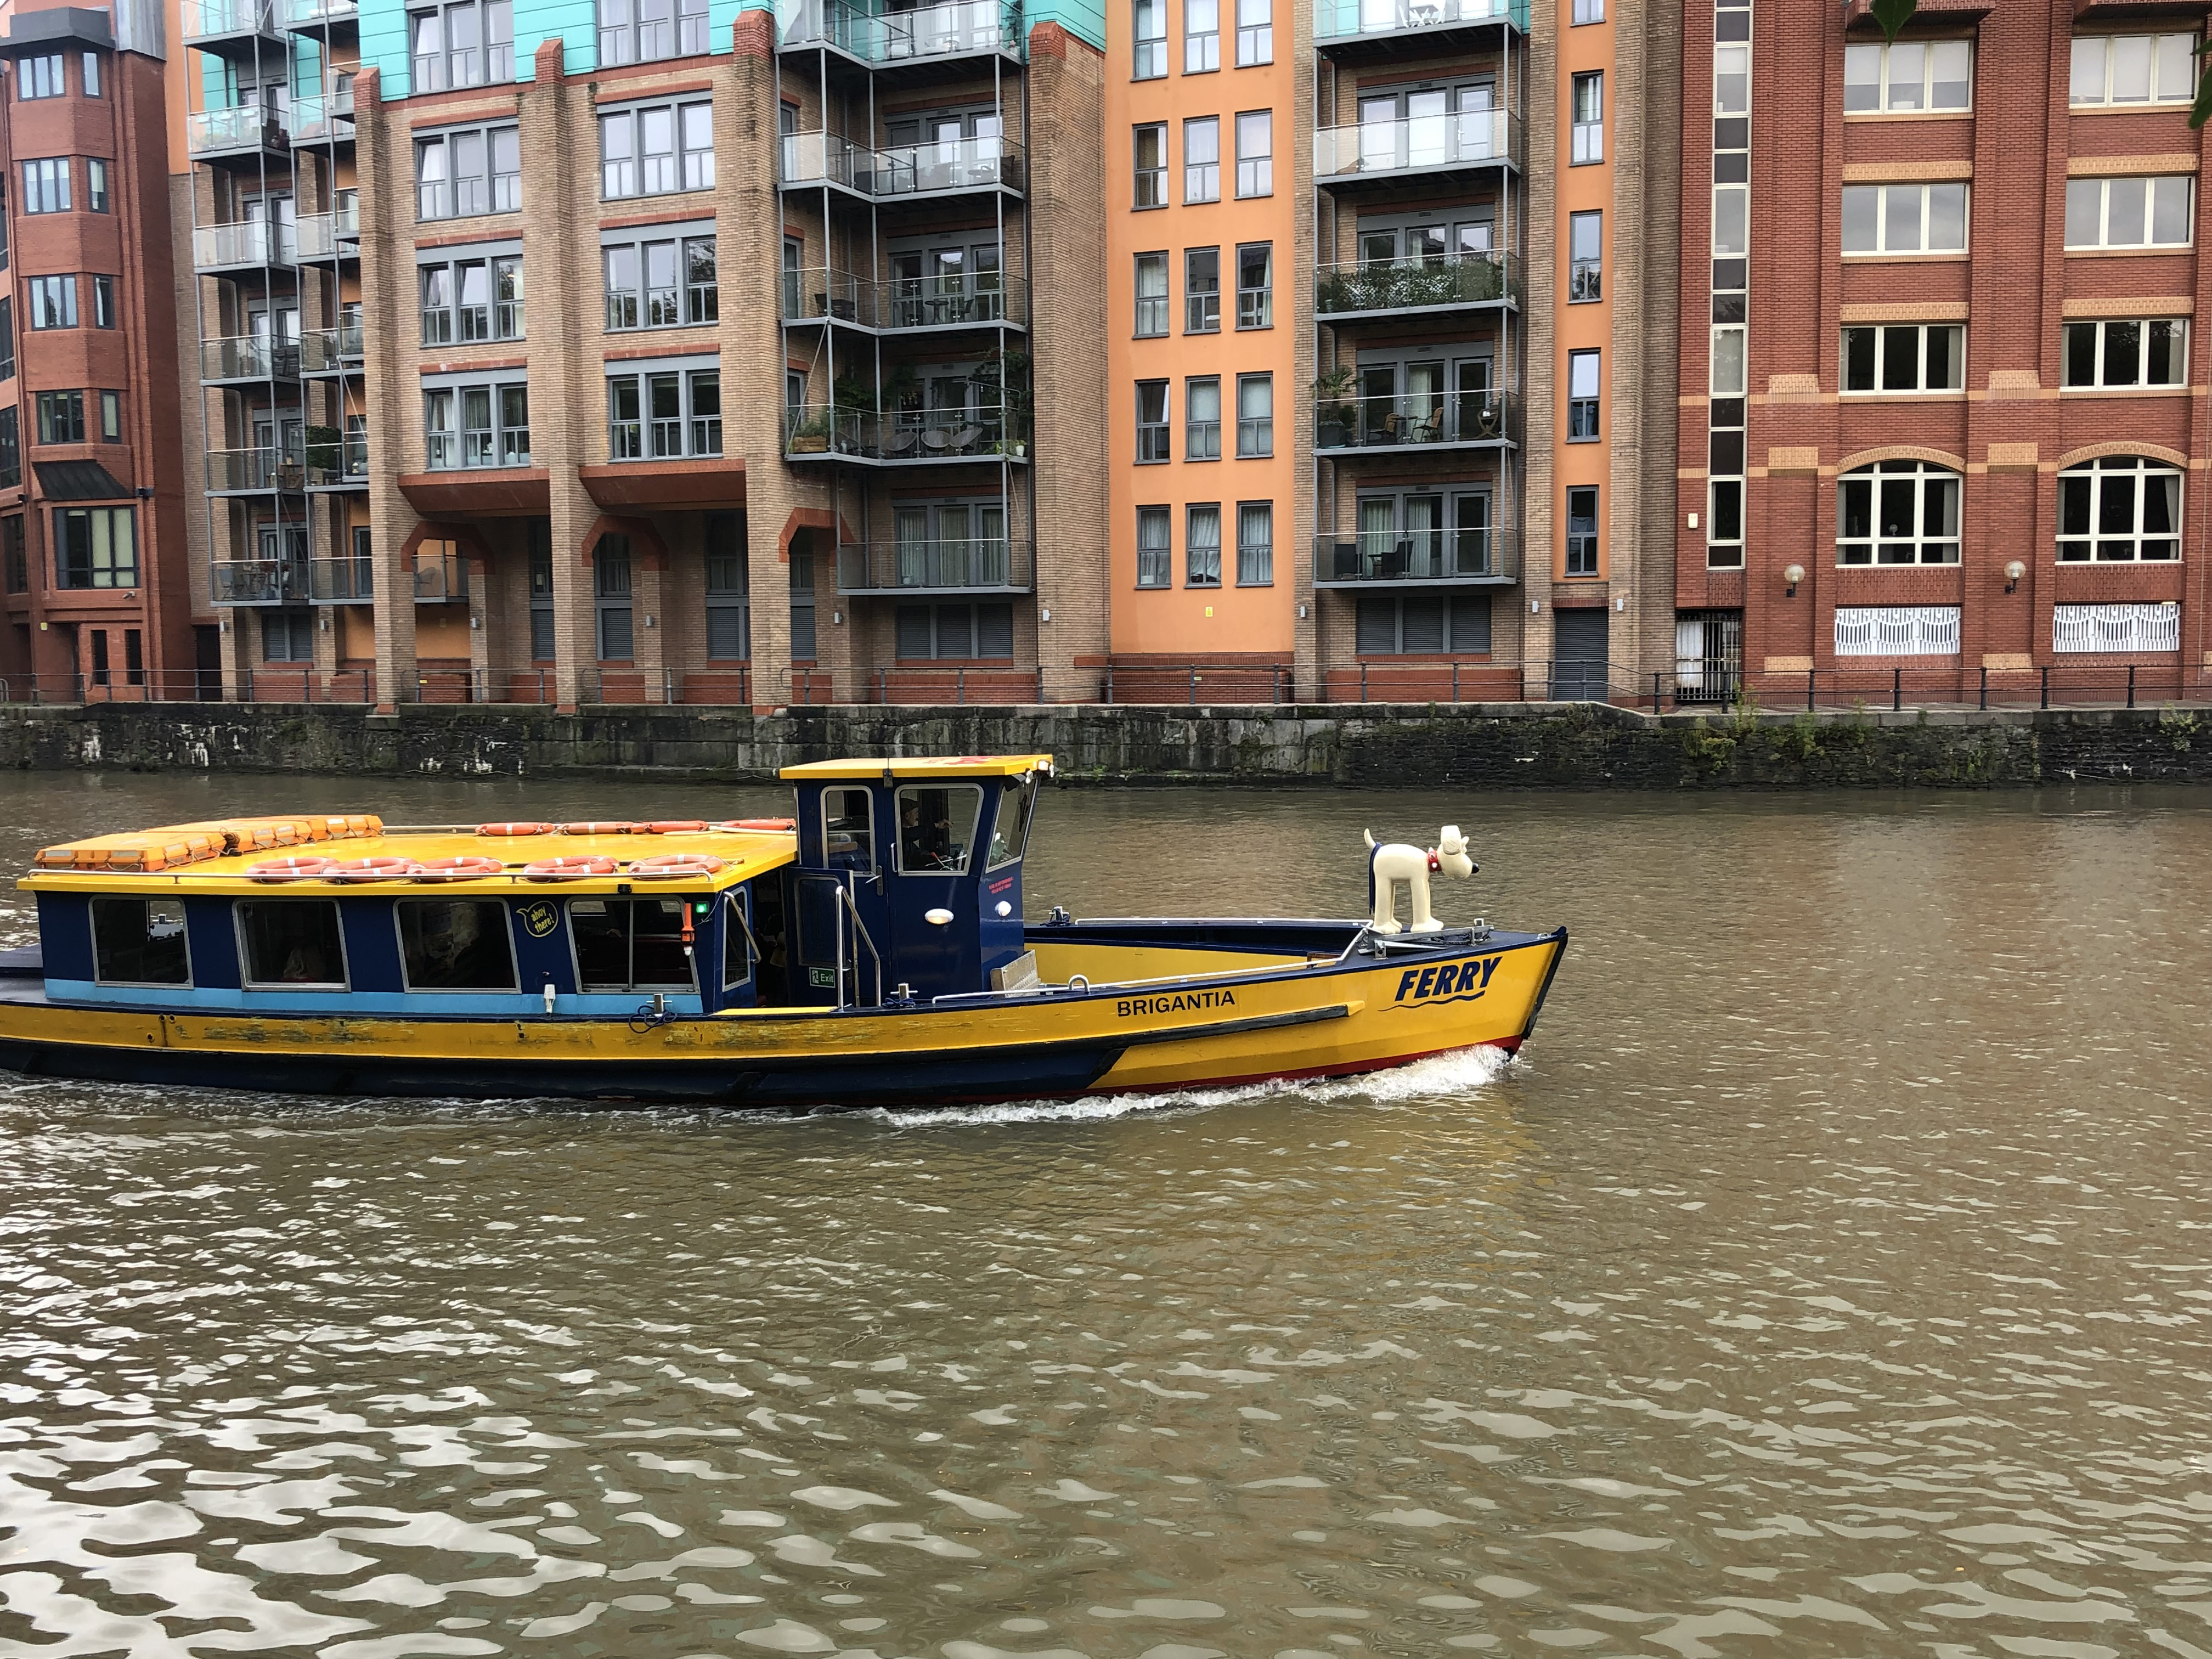 Gromit the dog as a figurehead in one of Bristol's yellow and blue water taxis.  Photo: © DHB